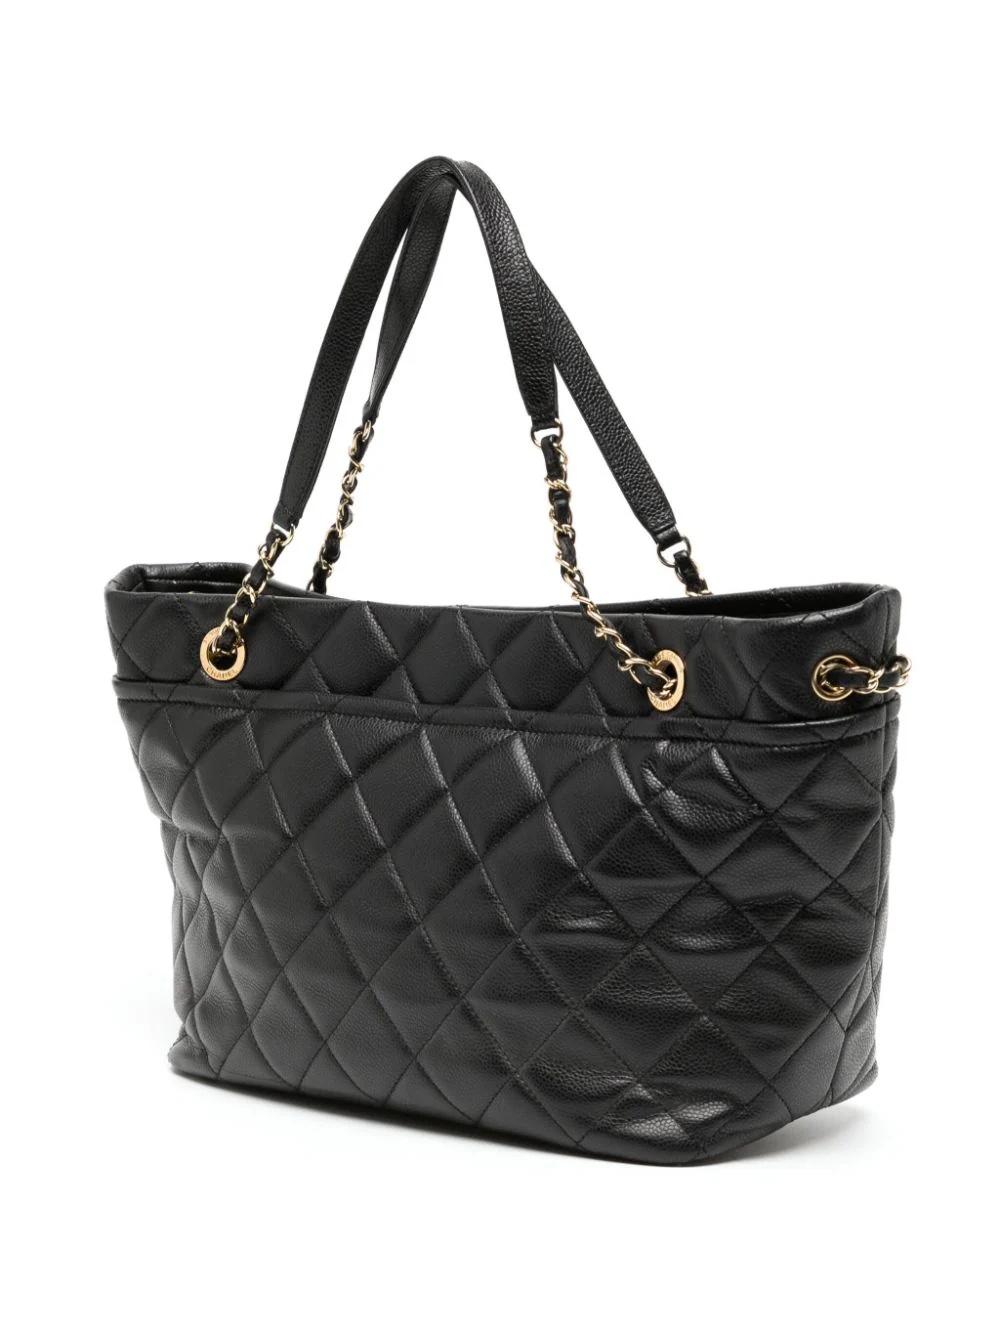 This timeless tote bag from Chanel is made of diamond-quilted caviar leather, showcasing the Maison's quintessential Parisian style. Its classic design features the hallmark interlocking CC logo on the front, making it an elegant piece that never